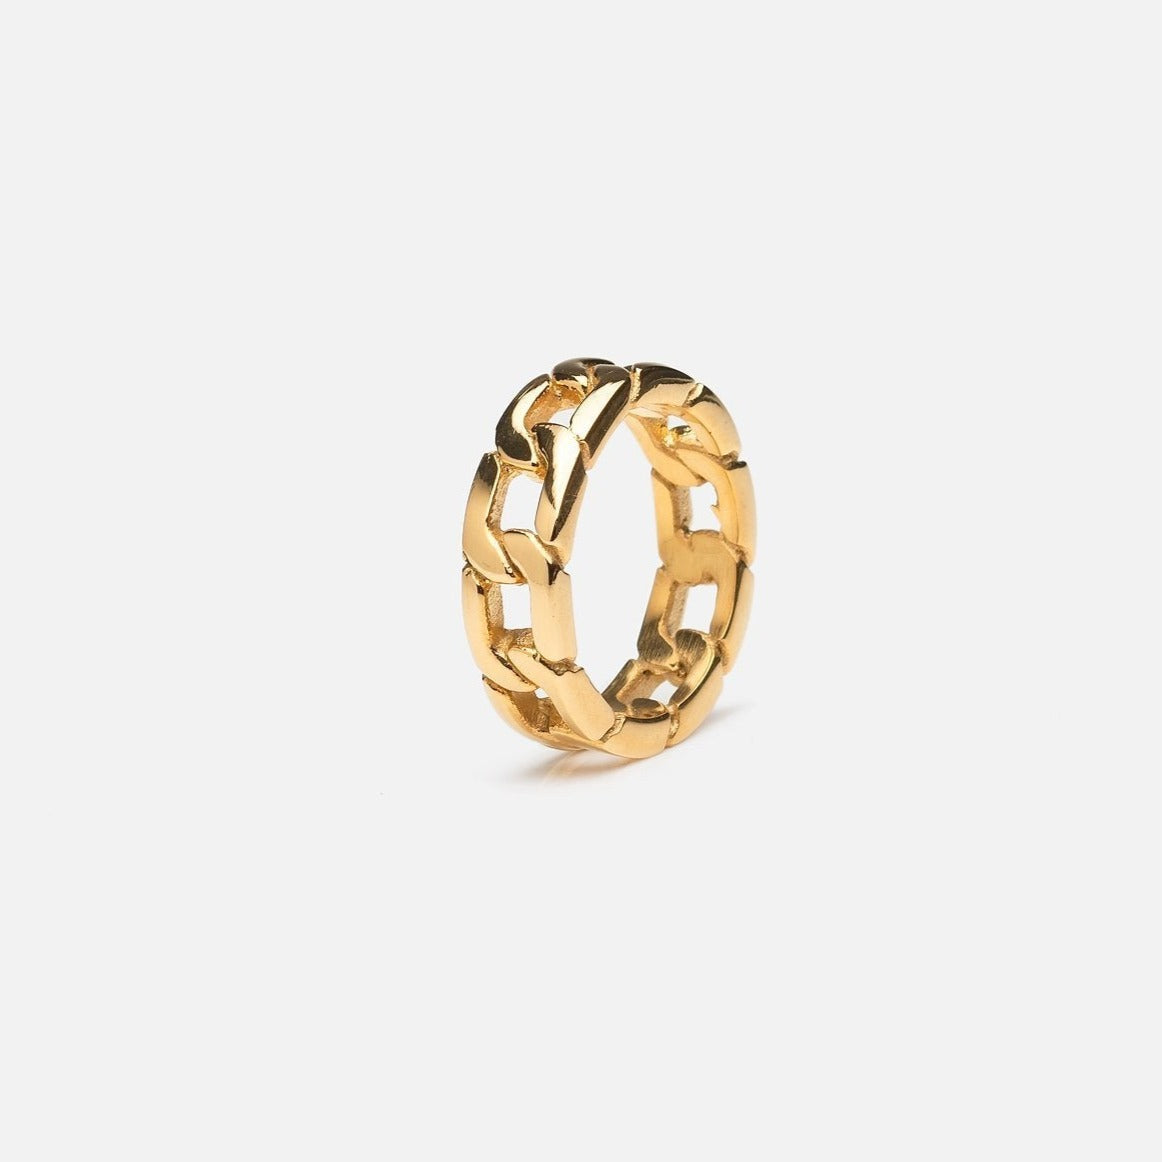 Chain Ring (Gold)